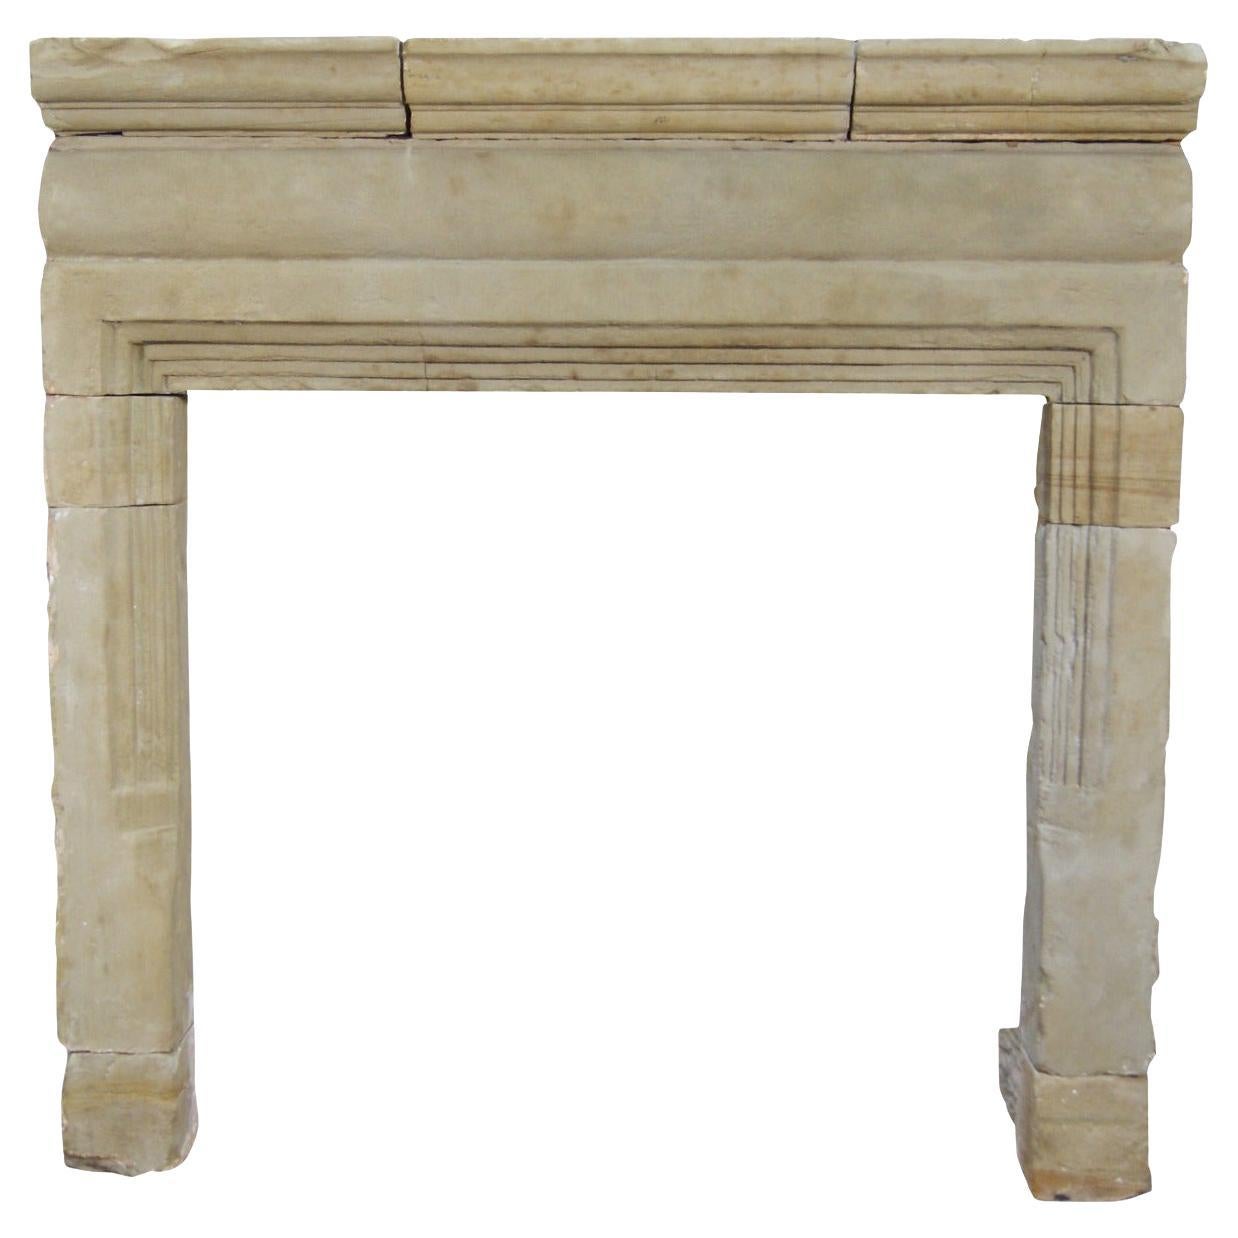 17th Century English Stone Fire Mantel For Sale